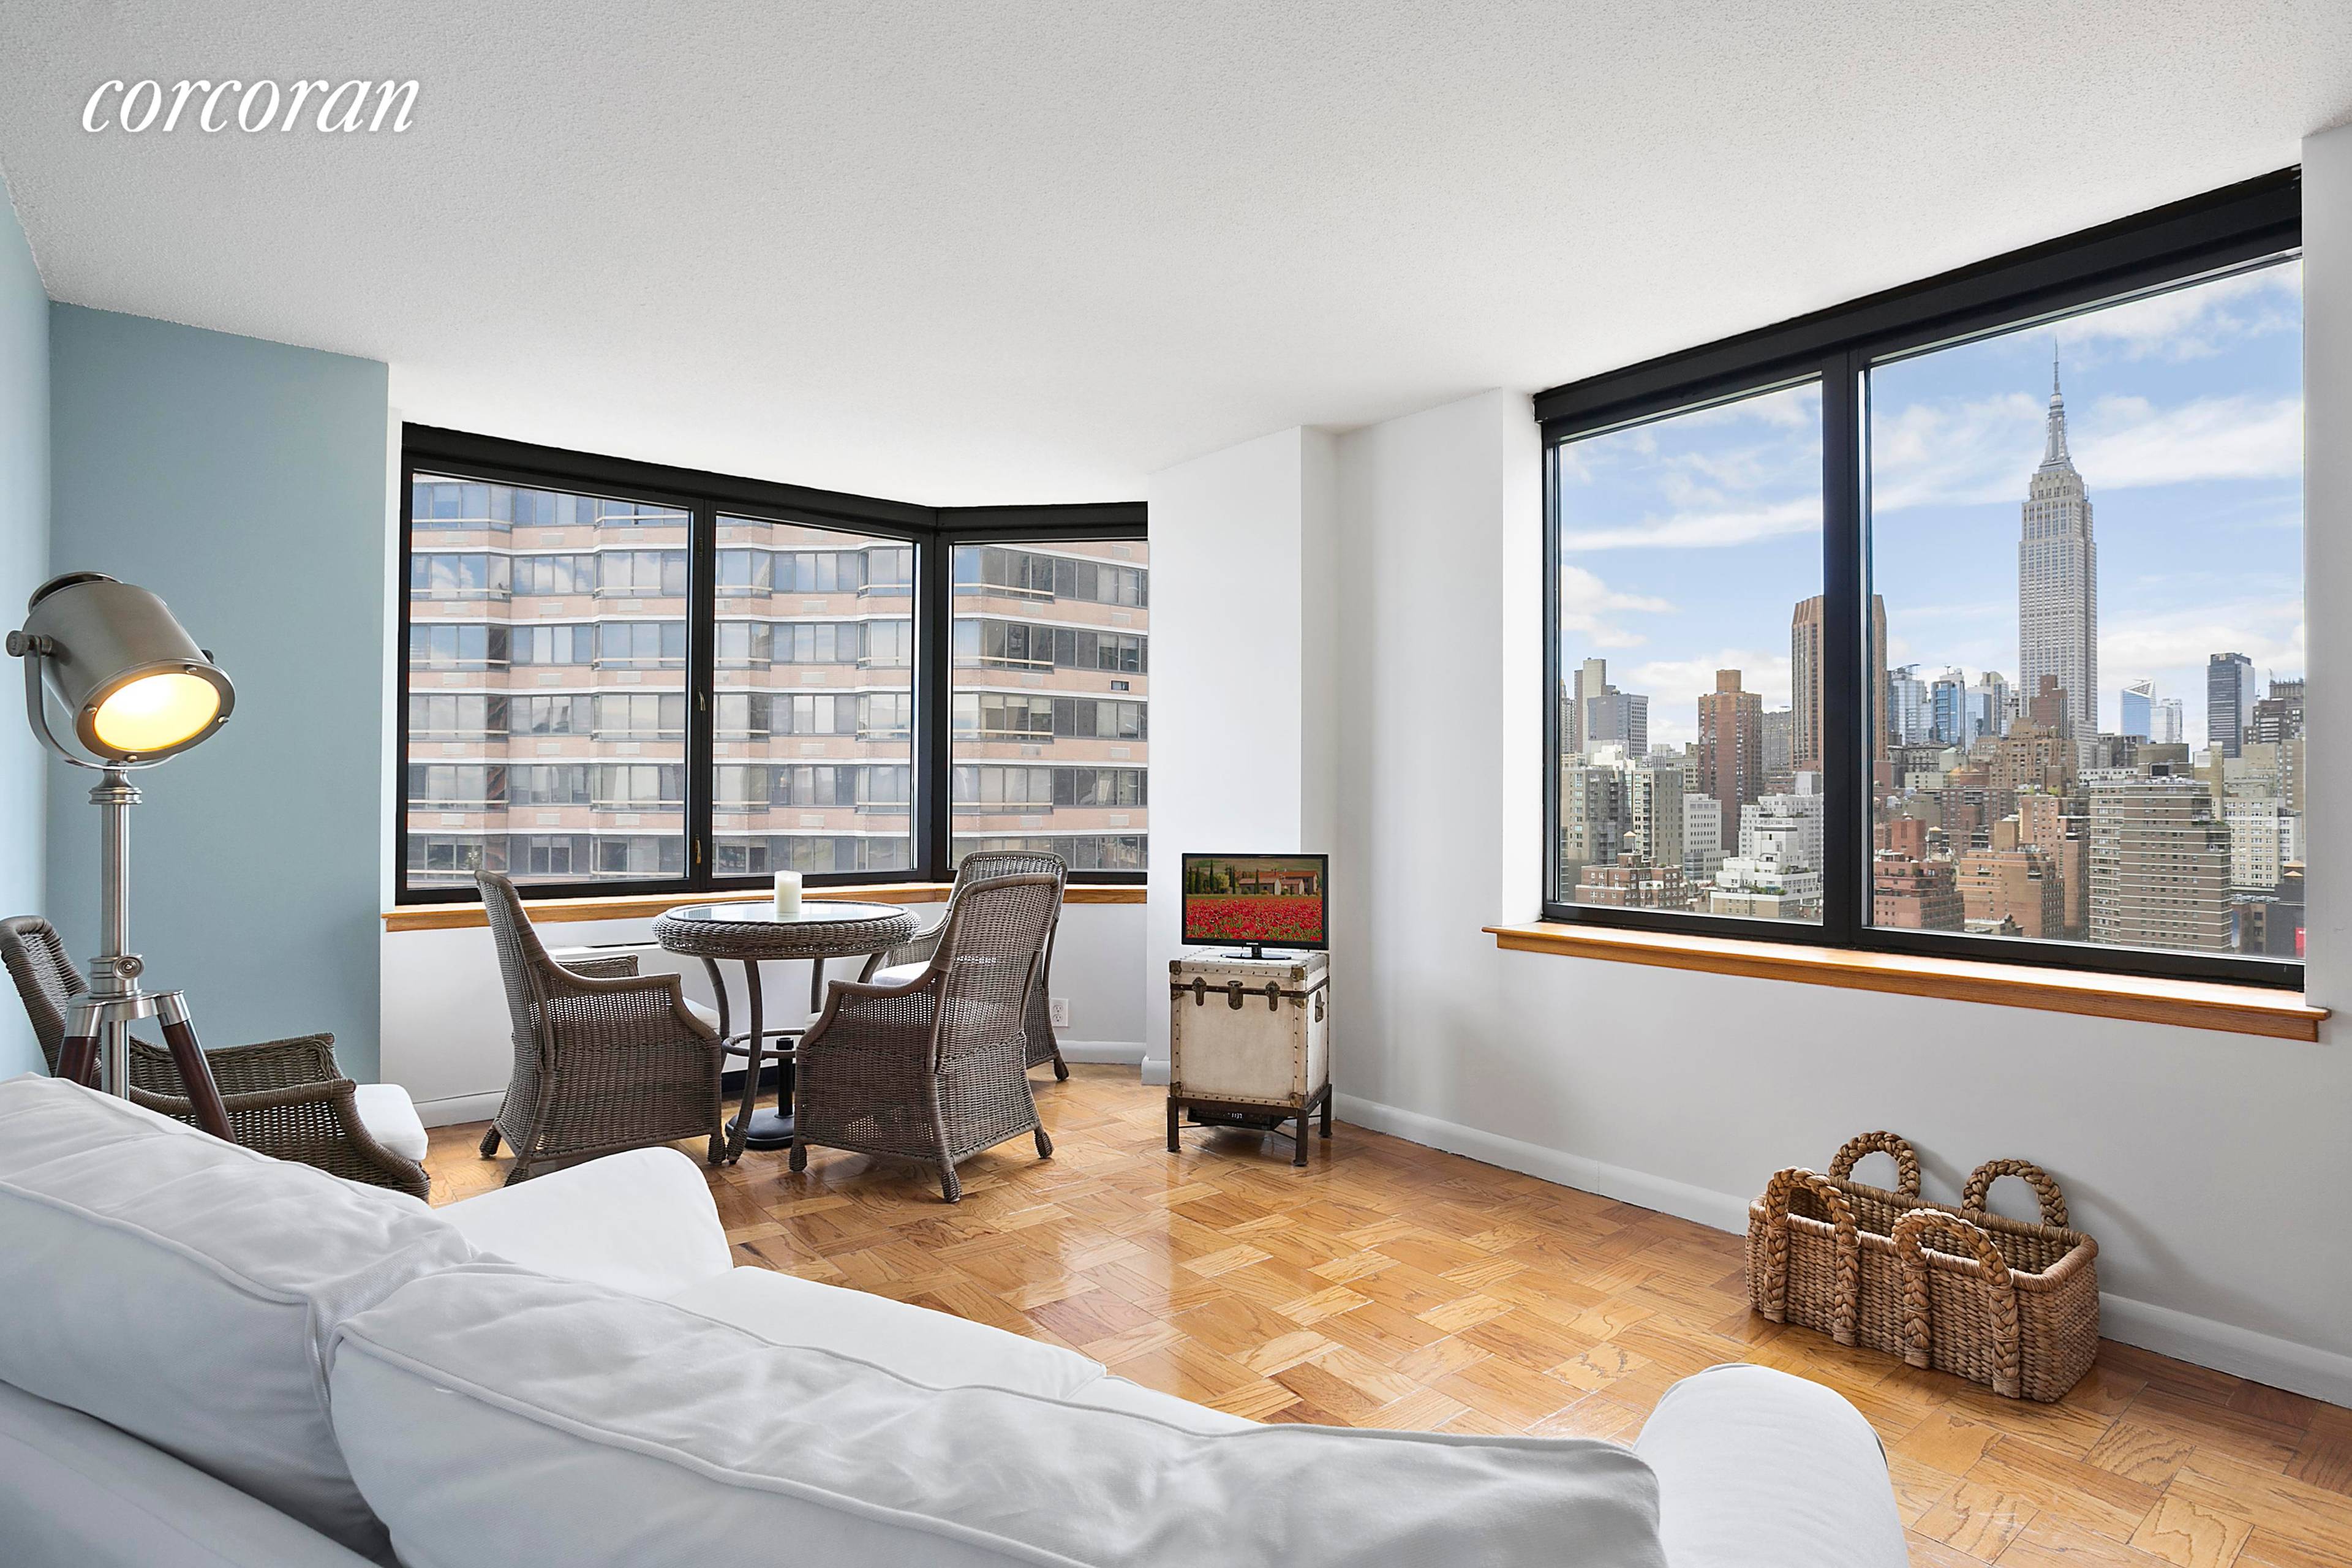 Welcome home to 415 East 37th St in Apt 22N ; sit back and enjoy unparalleled views of the Empire State Building amp ; East River from this astonishing one ...